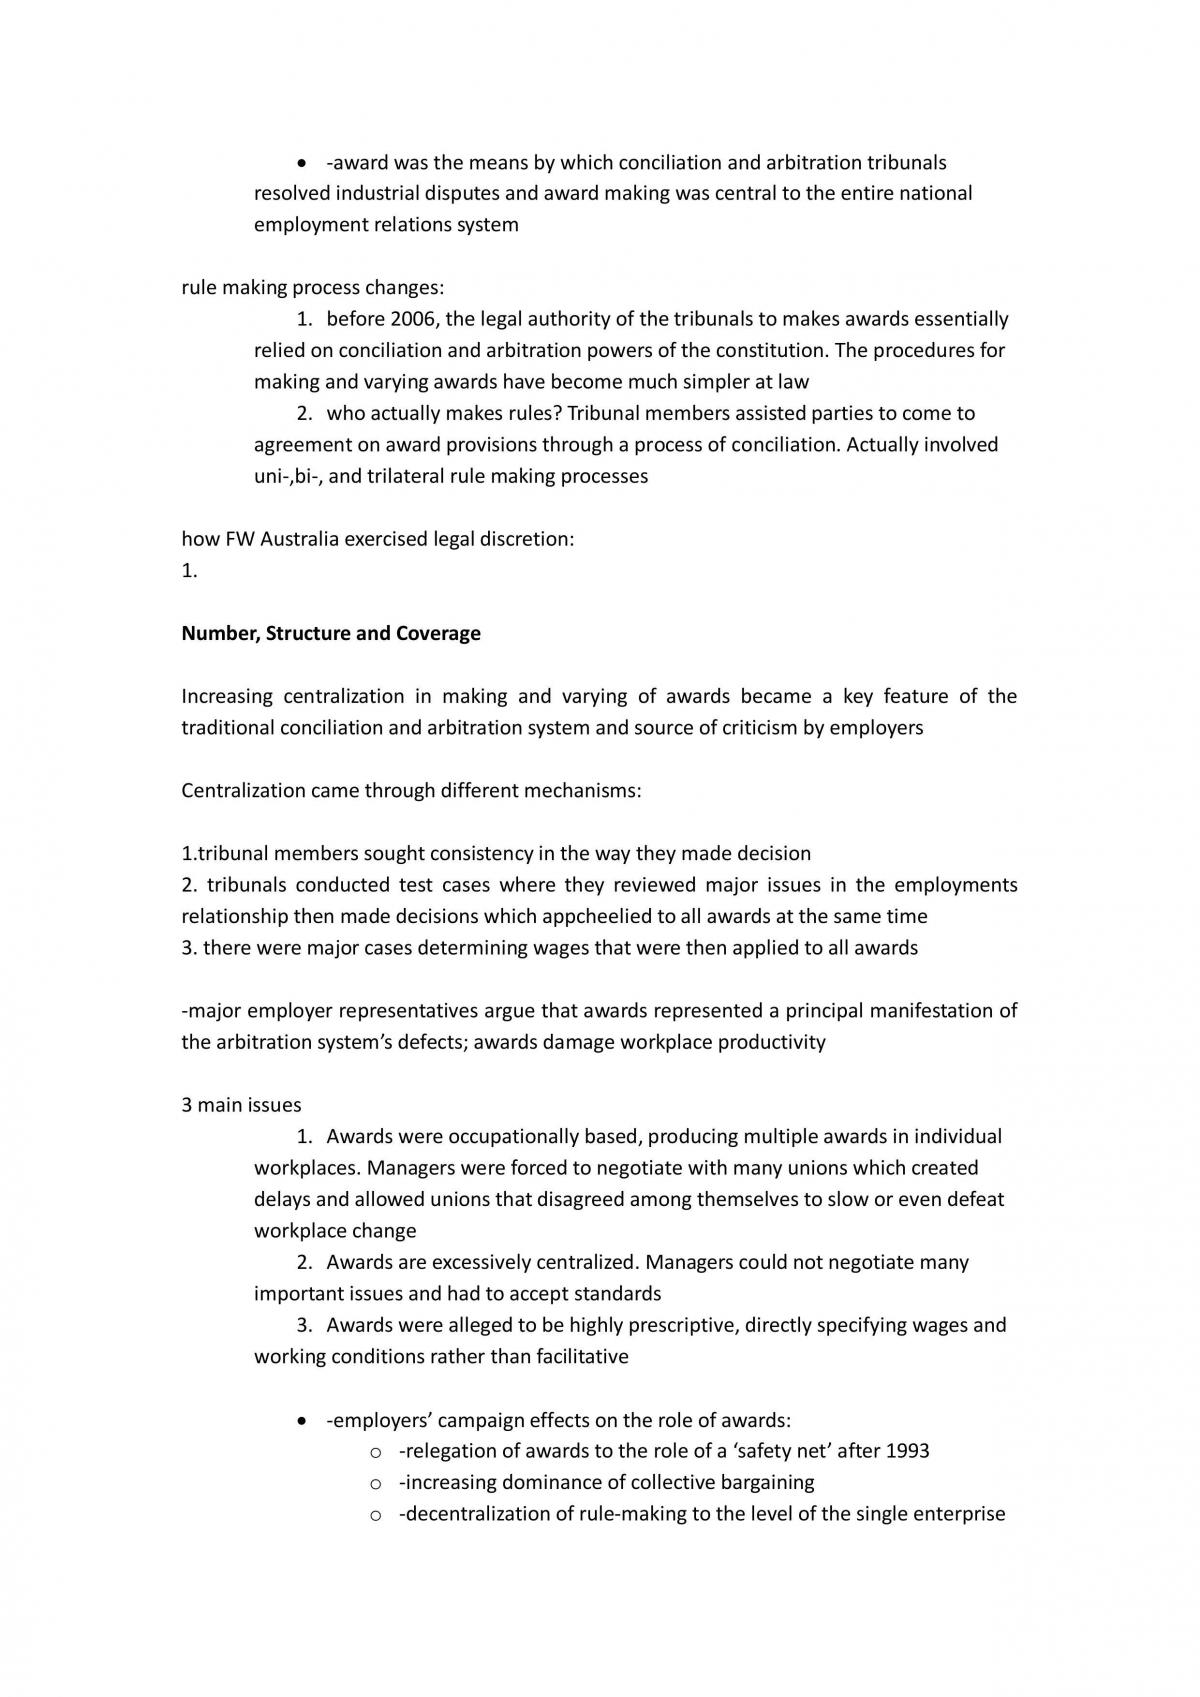 WORK1003 Tutorial and Reading Study Notes - Page 49